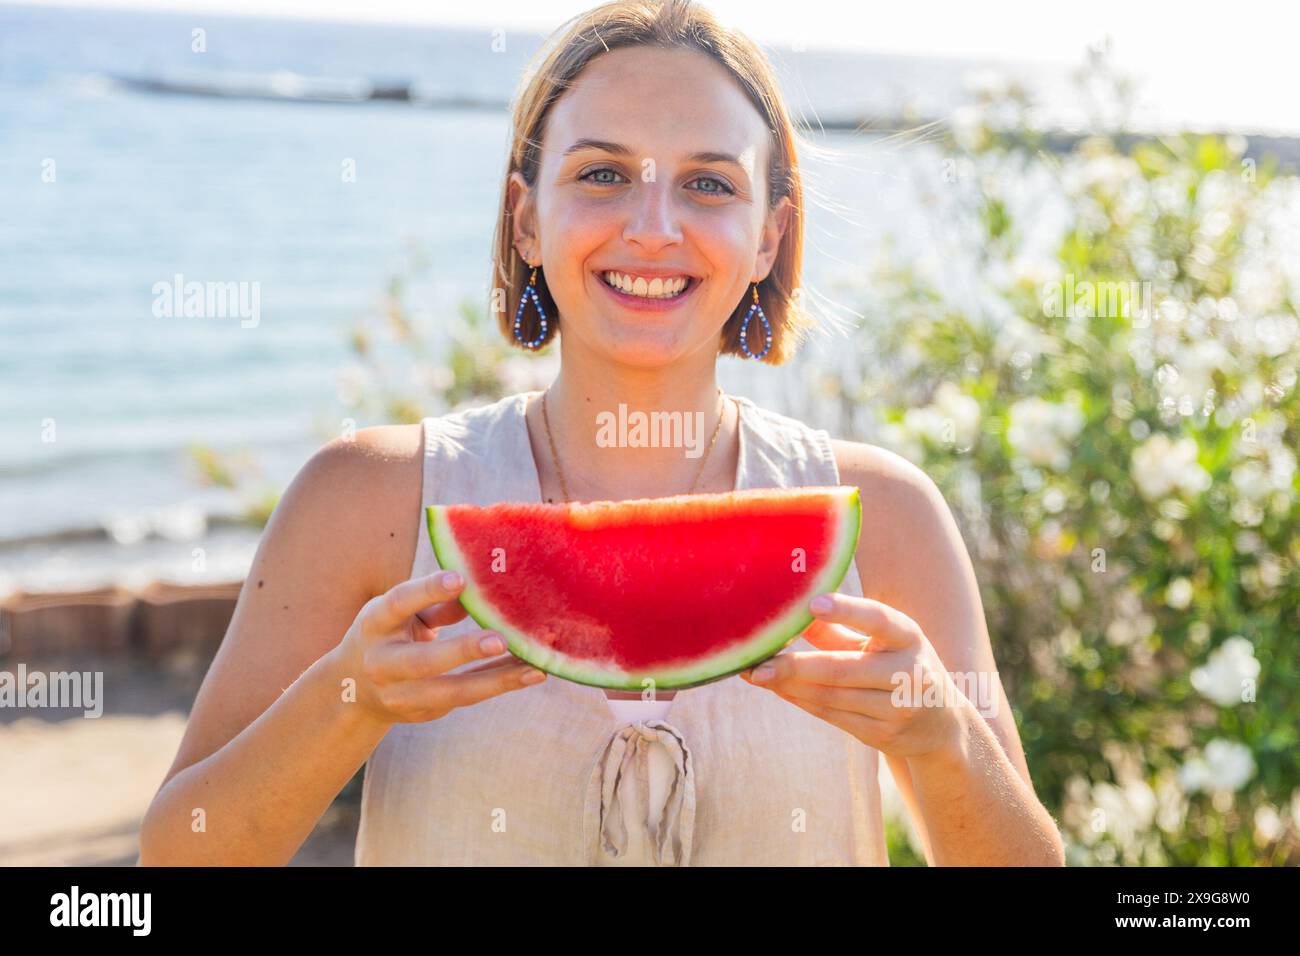 A woman is holding a watermelon slice in her hand, smiling at the camera. Stock Photo